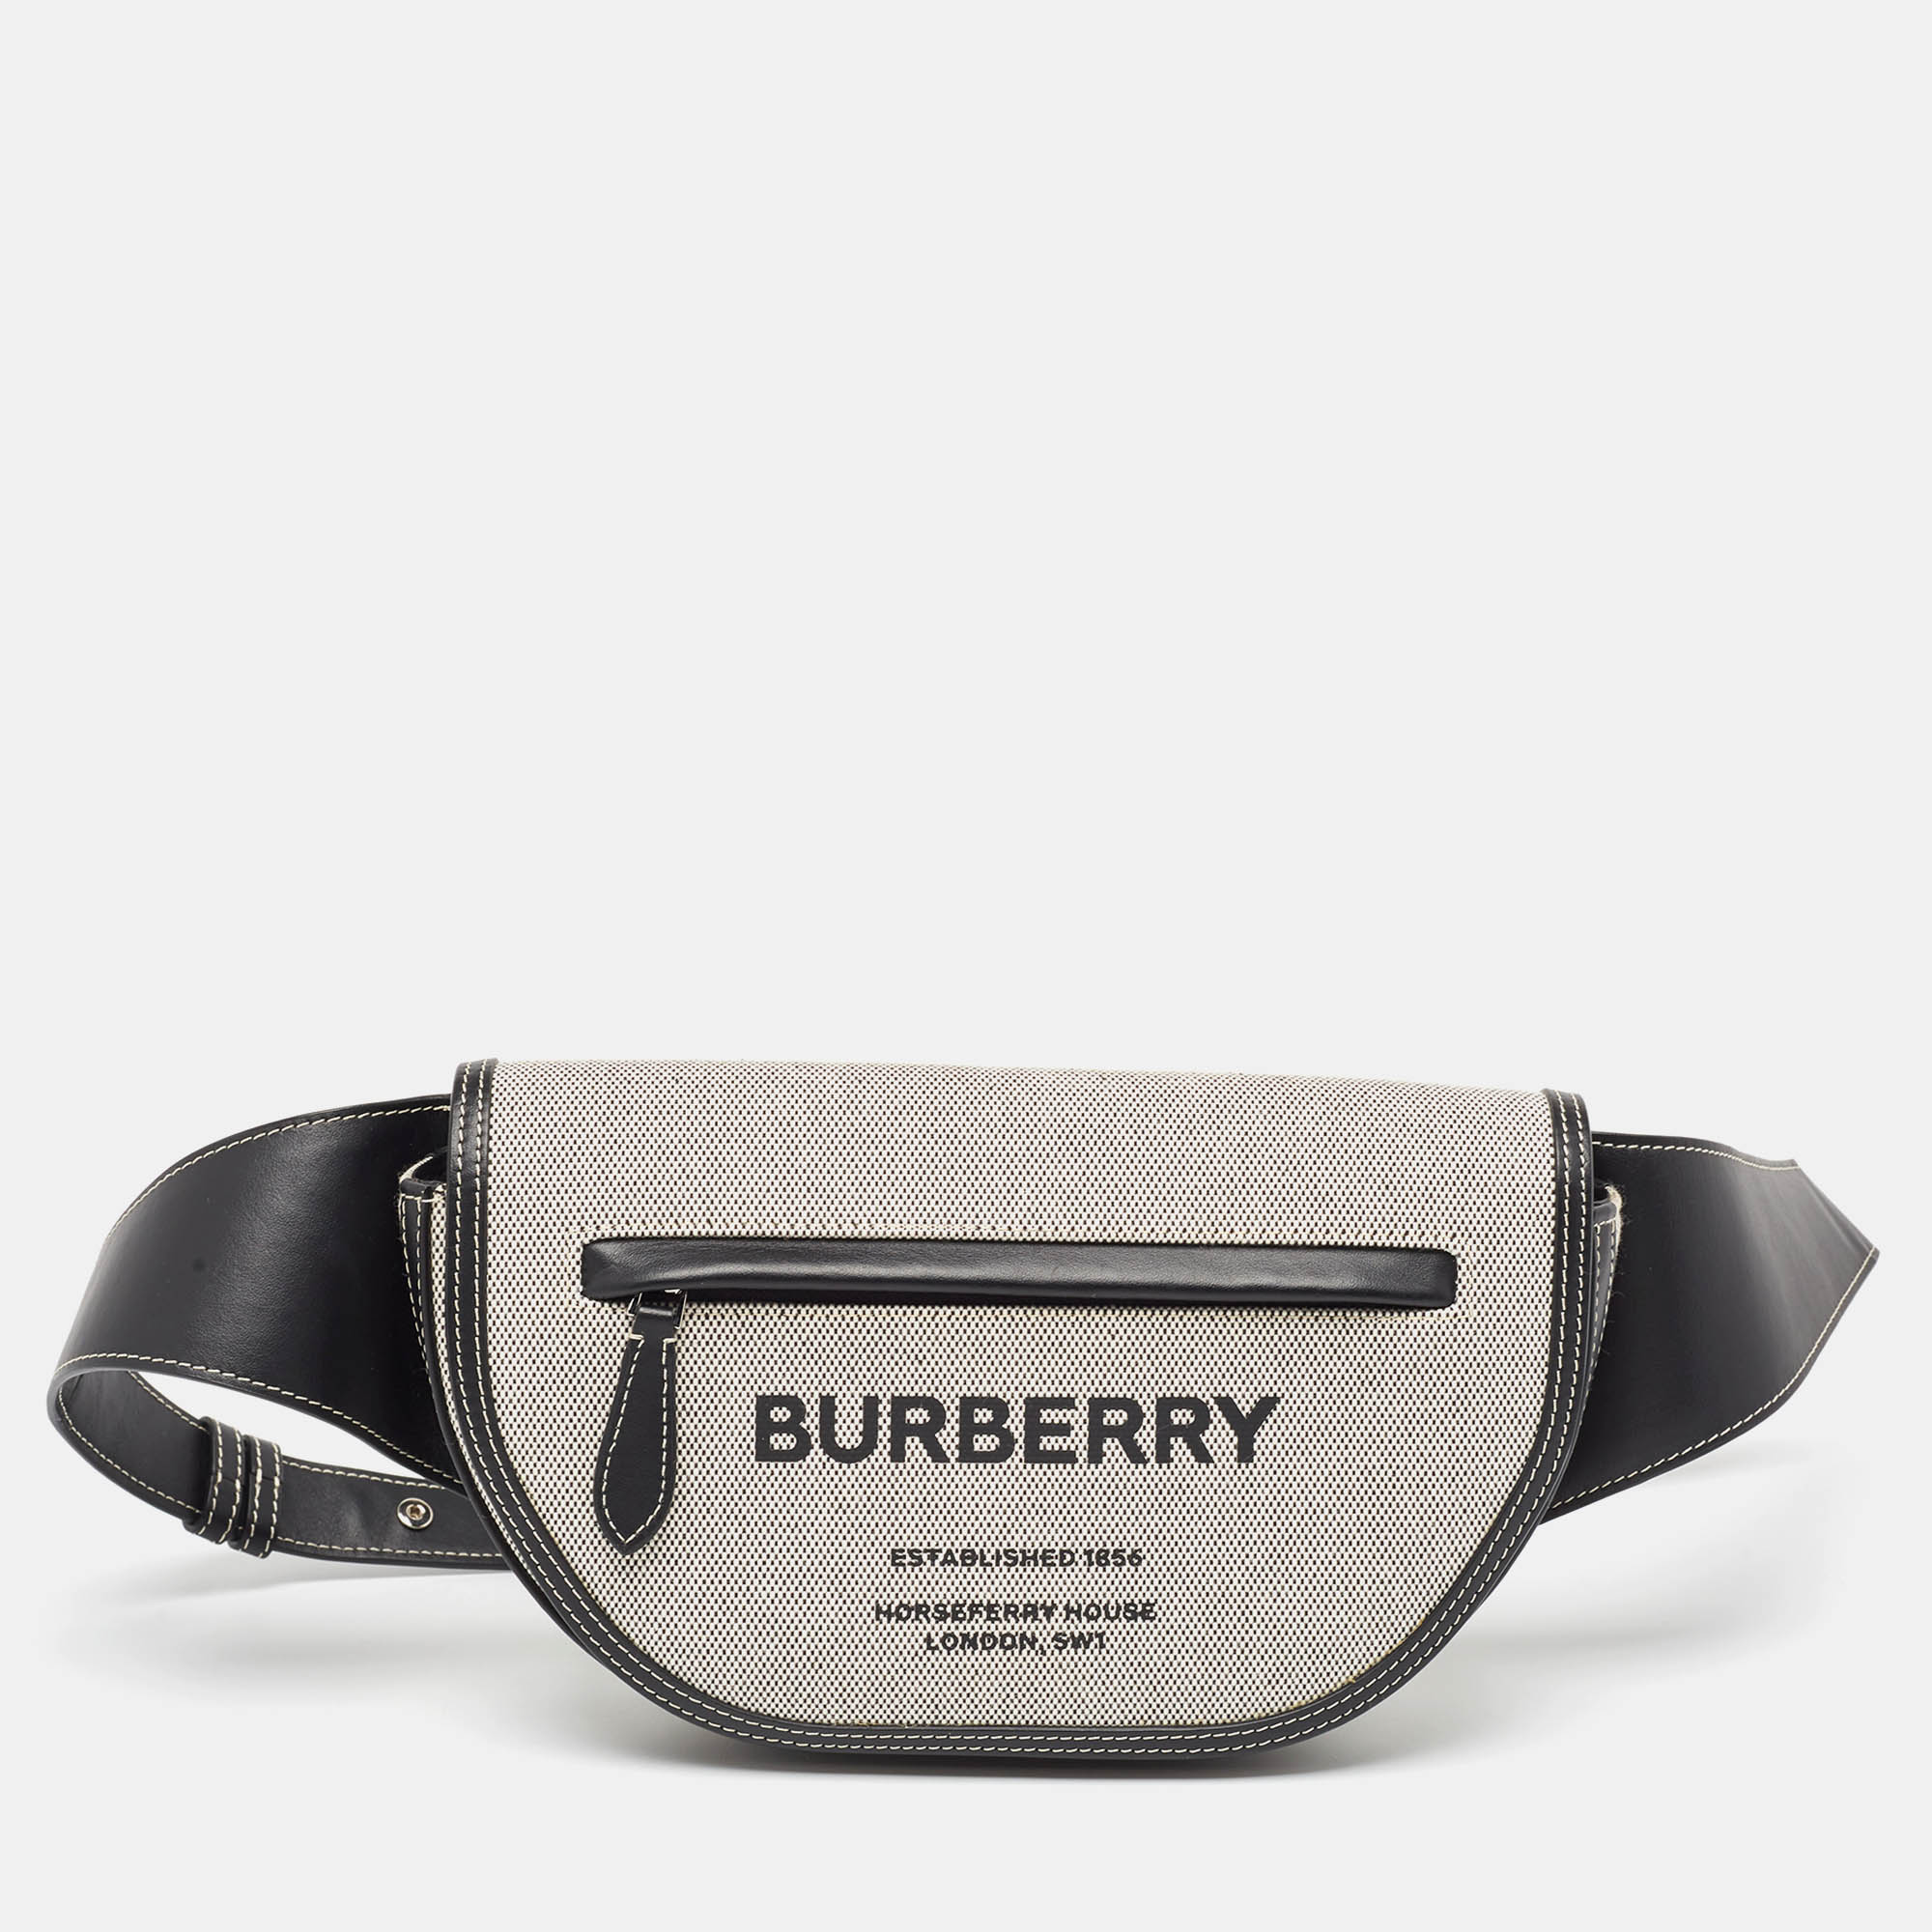 Burberry black/white canvas and leather small olympia bumbag